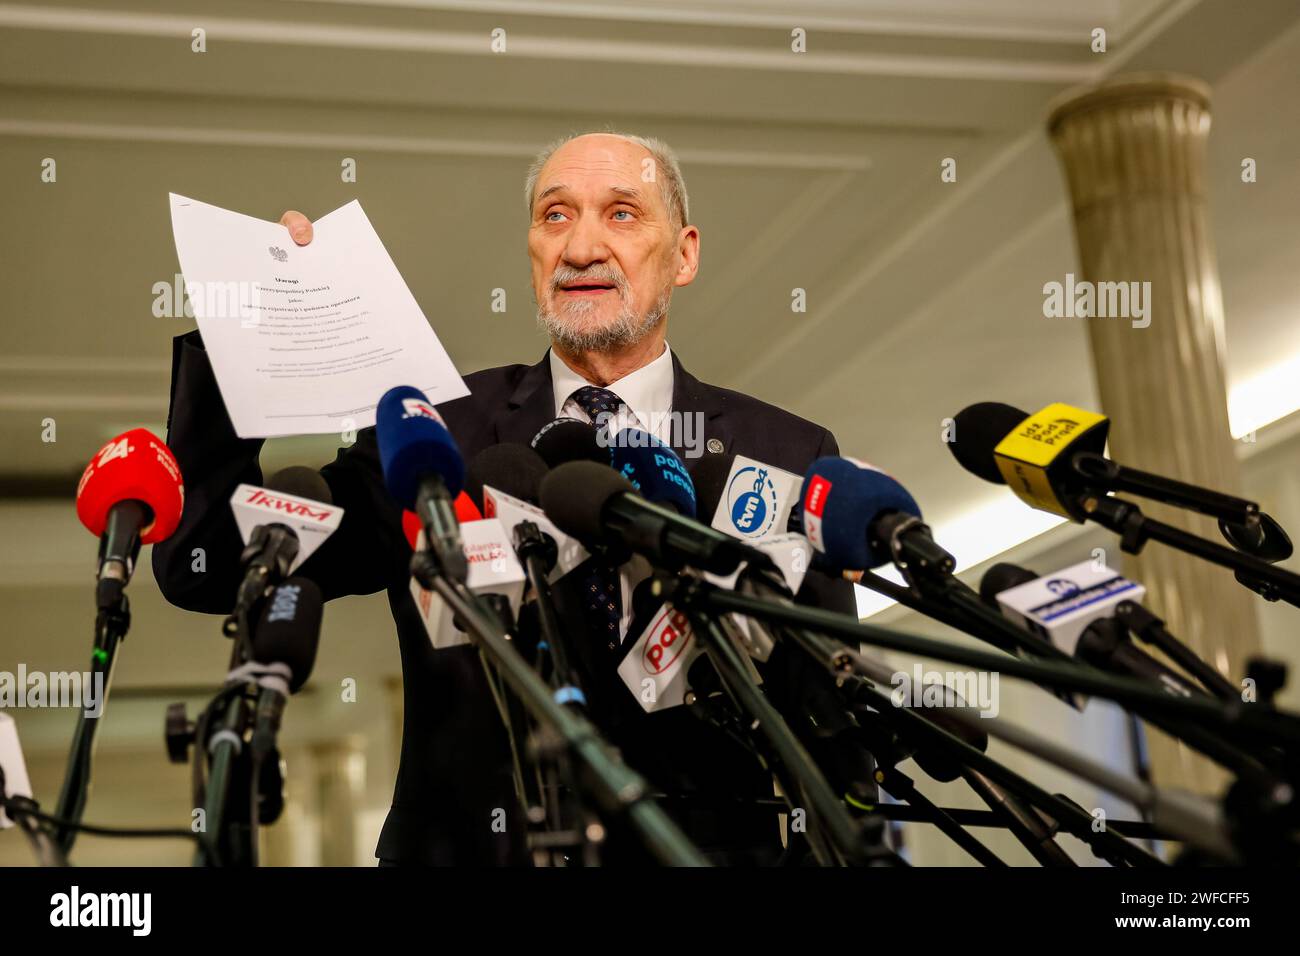 Antoni Macierewicz, former Minister of Defence of Poland talks to the press during the 4th session of Polish Parliament that takes place amid chaos created by legal disagreement with the previous government. The current government took over power in Poland on December 13, 2023, taking over from the Law and Justice far-right political party, which has ruled for 8 years. Both sides accuse each other of unconstitutional acts, and two de facto legal systems are present in the country. (Photo by Dominika Zarzycka / SOPA Images/Sipa USA) Stock Photo